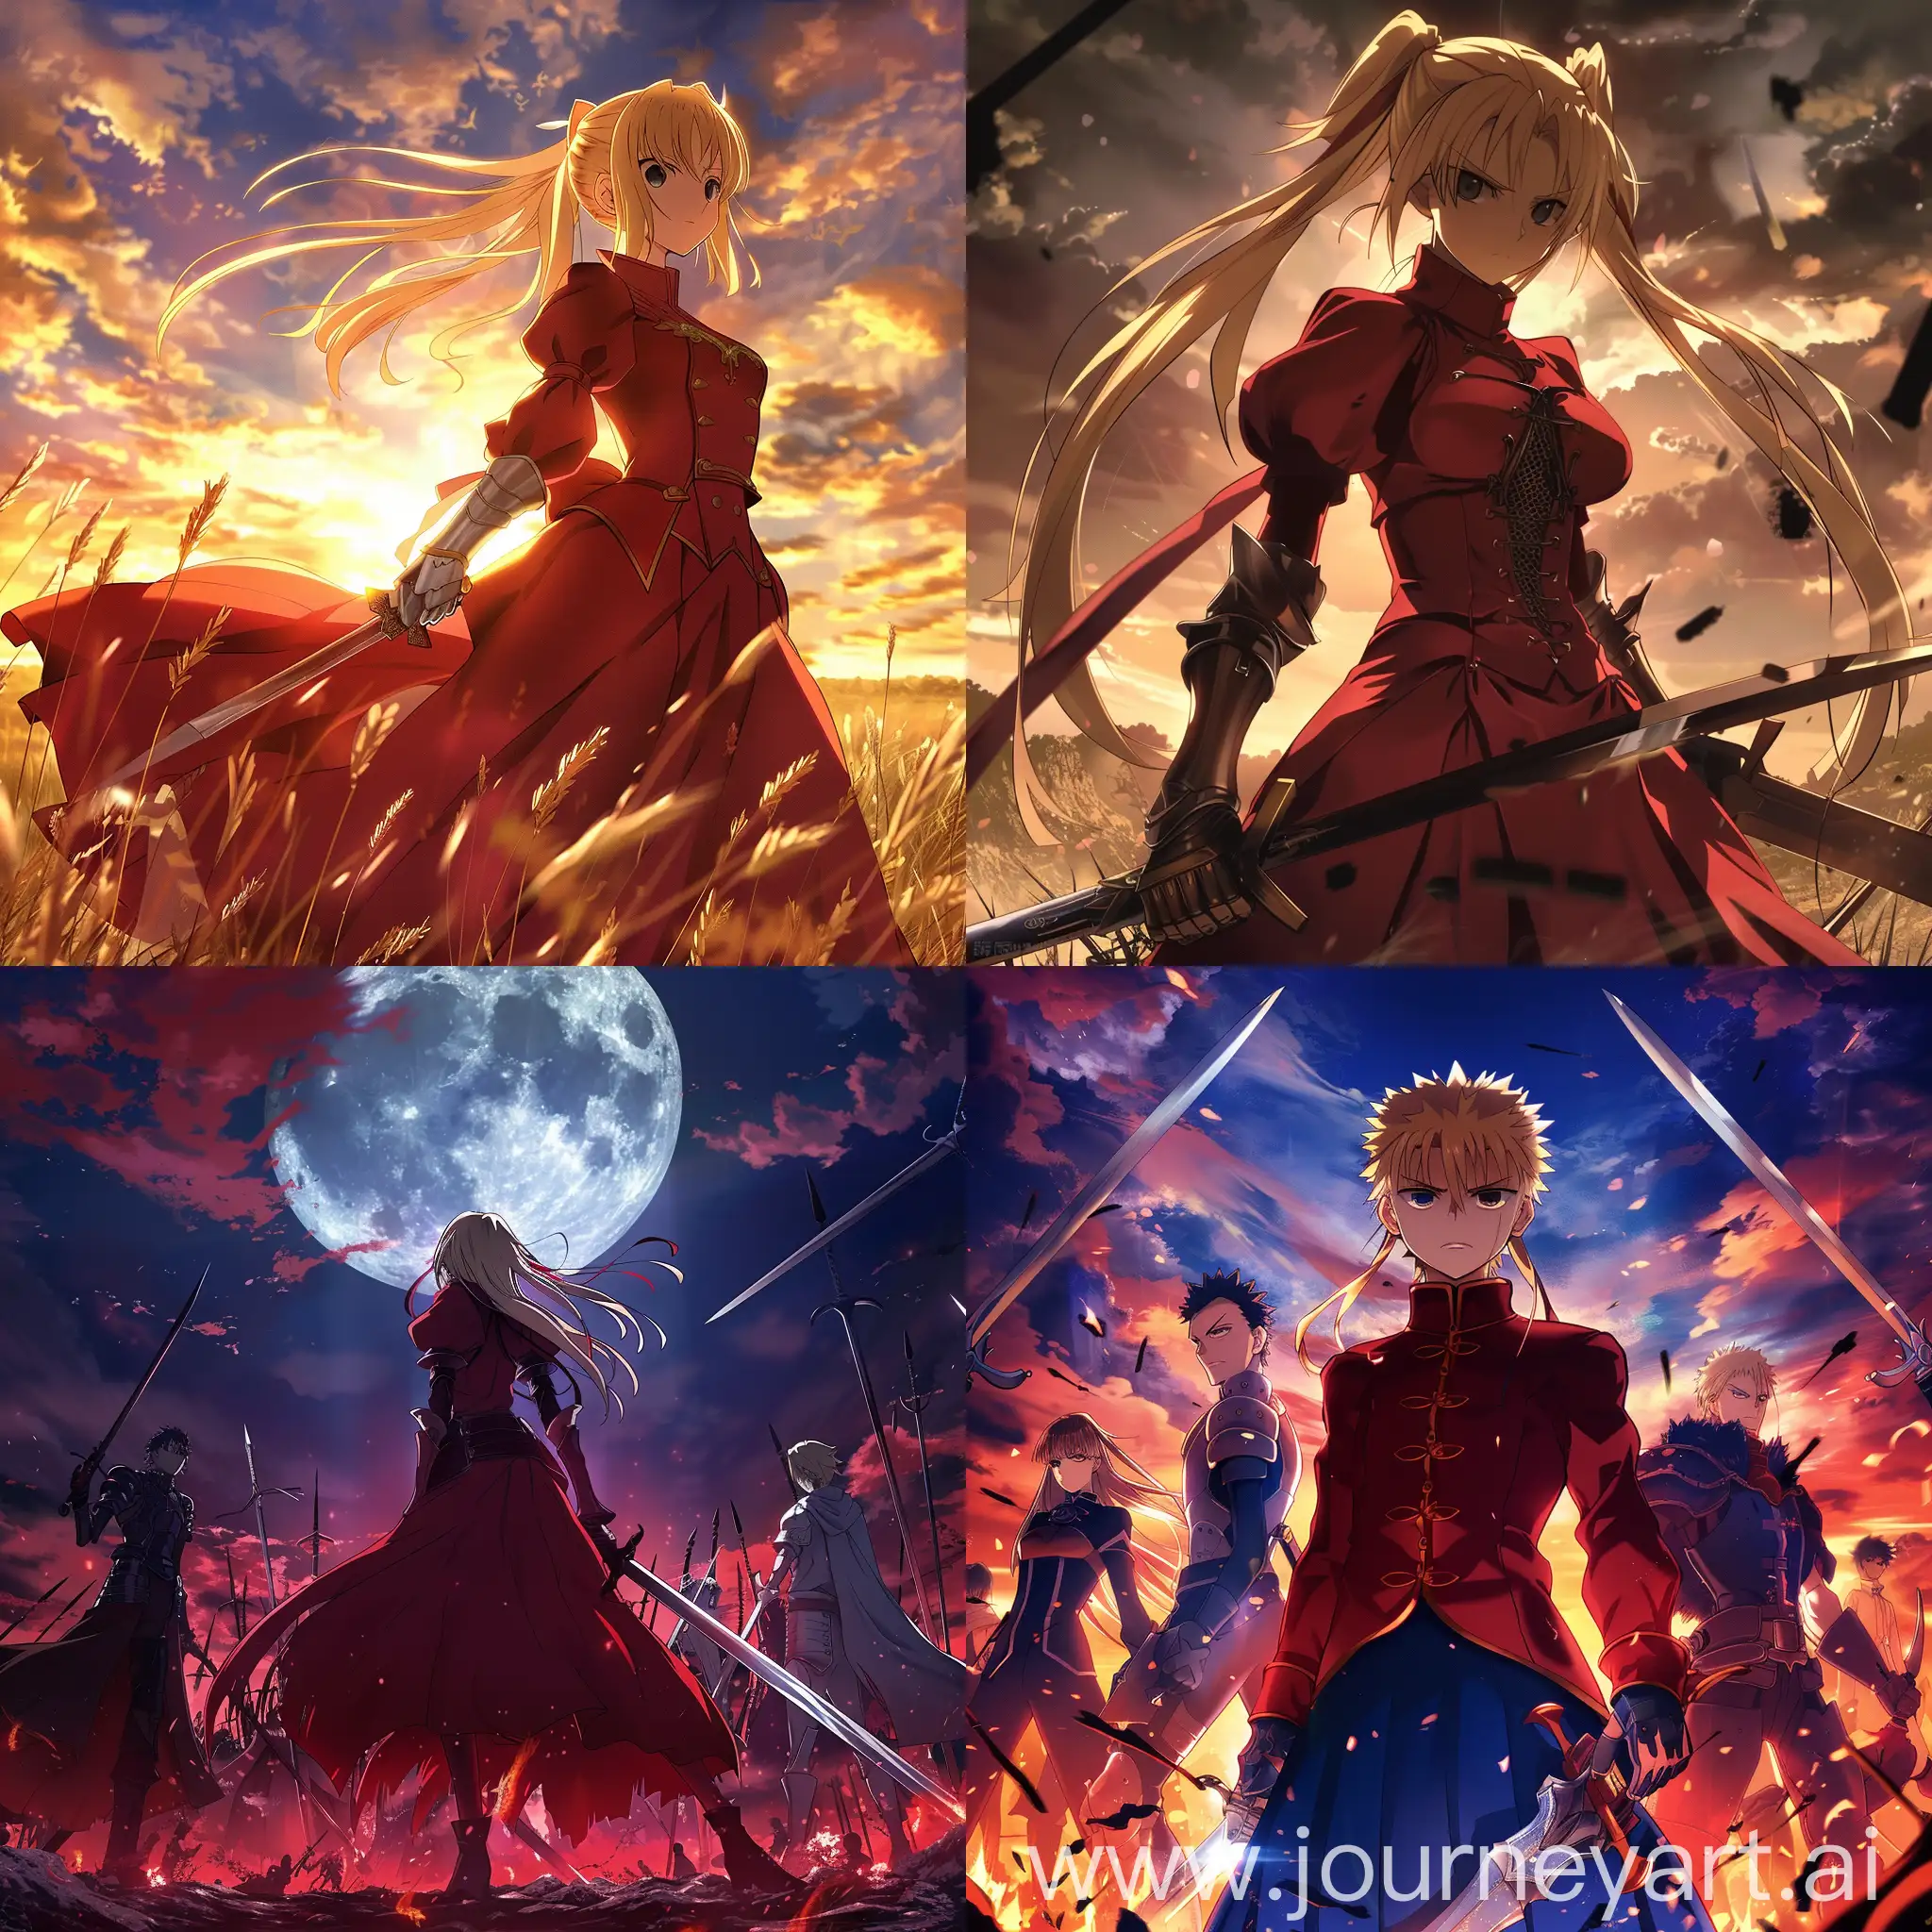 Fate-Stay-Night-Anime-Characters-in-11-Aspect-Ratio-Artwork